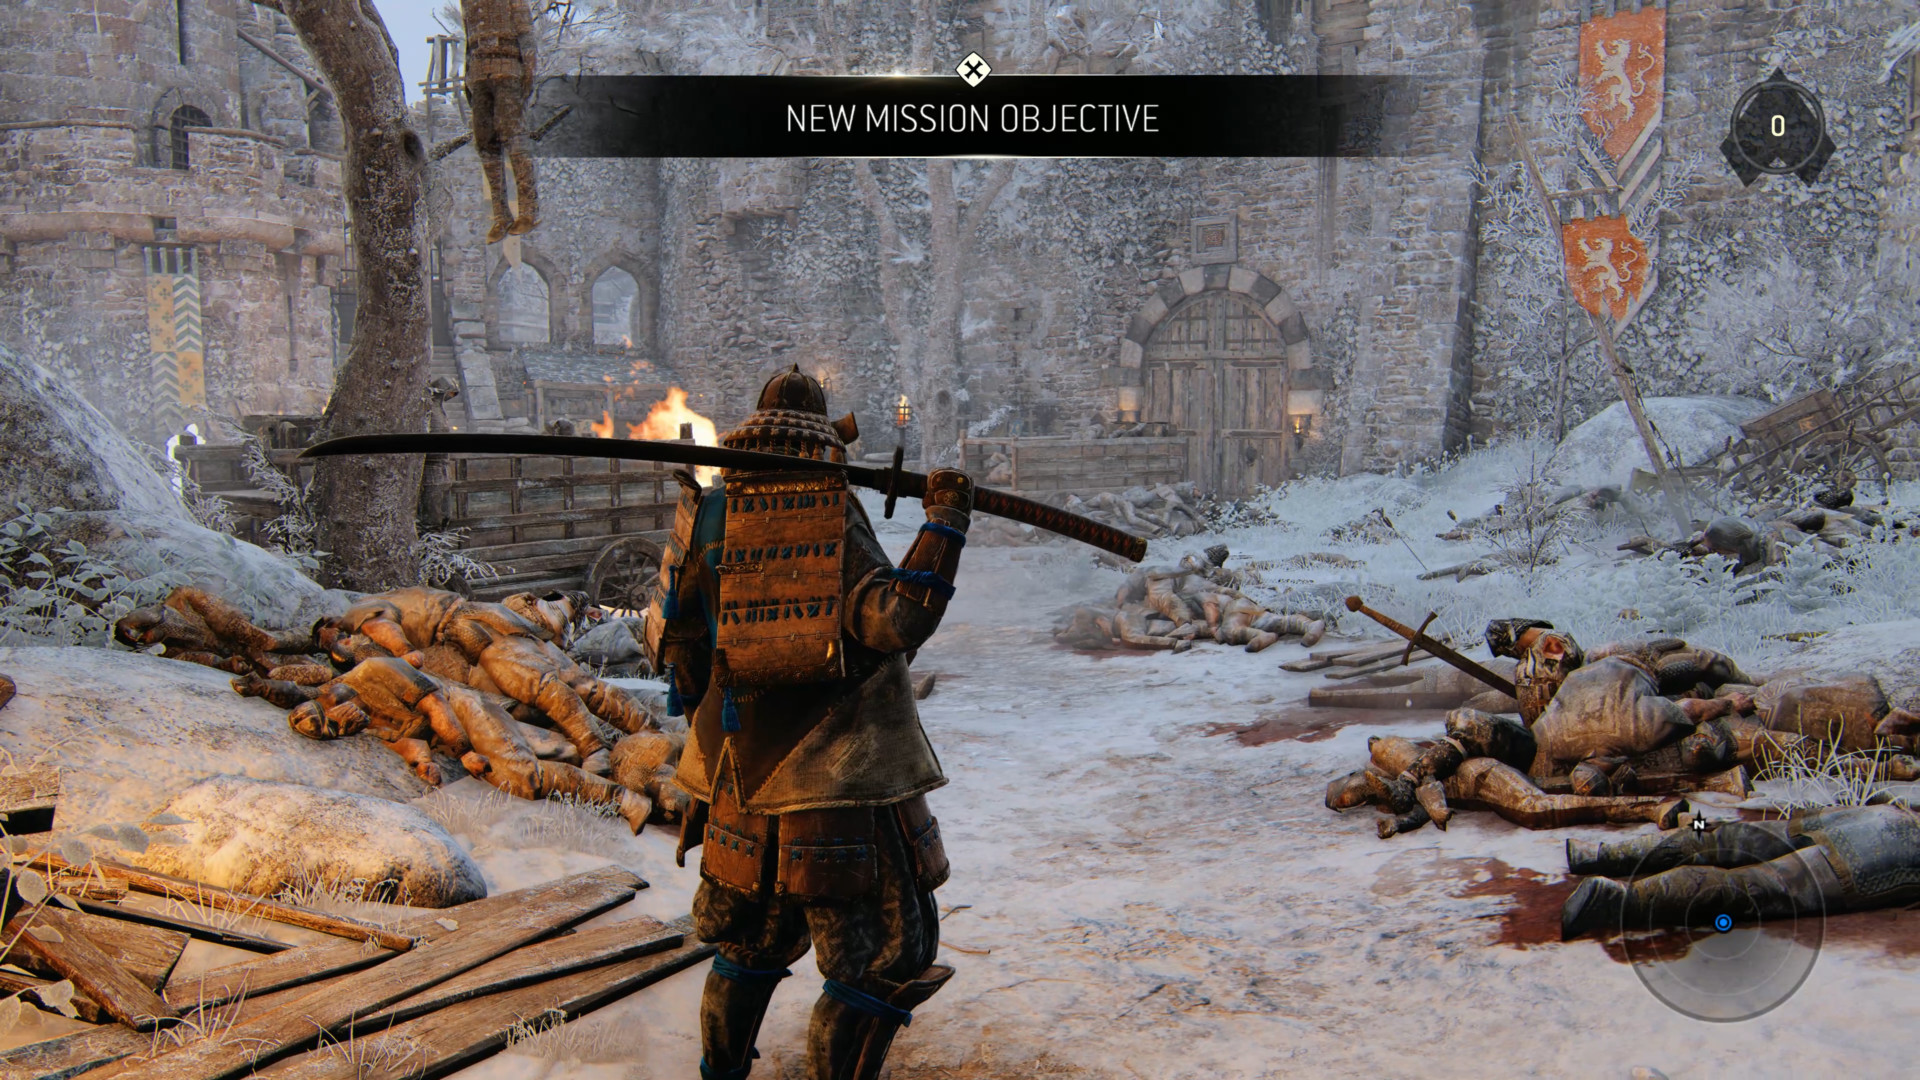 Screenshot from For Honor in game. A samurai is standing in a snowy battlefield with a popup overhead stating a new mission objective.